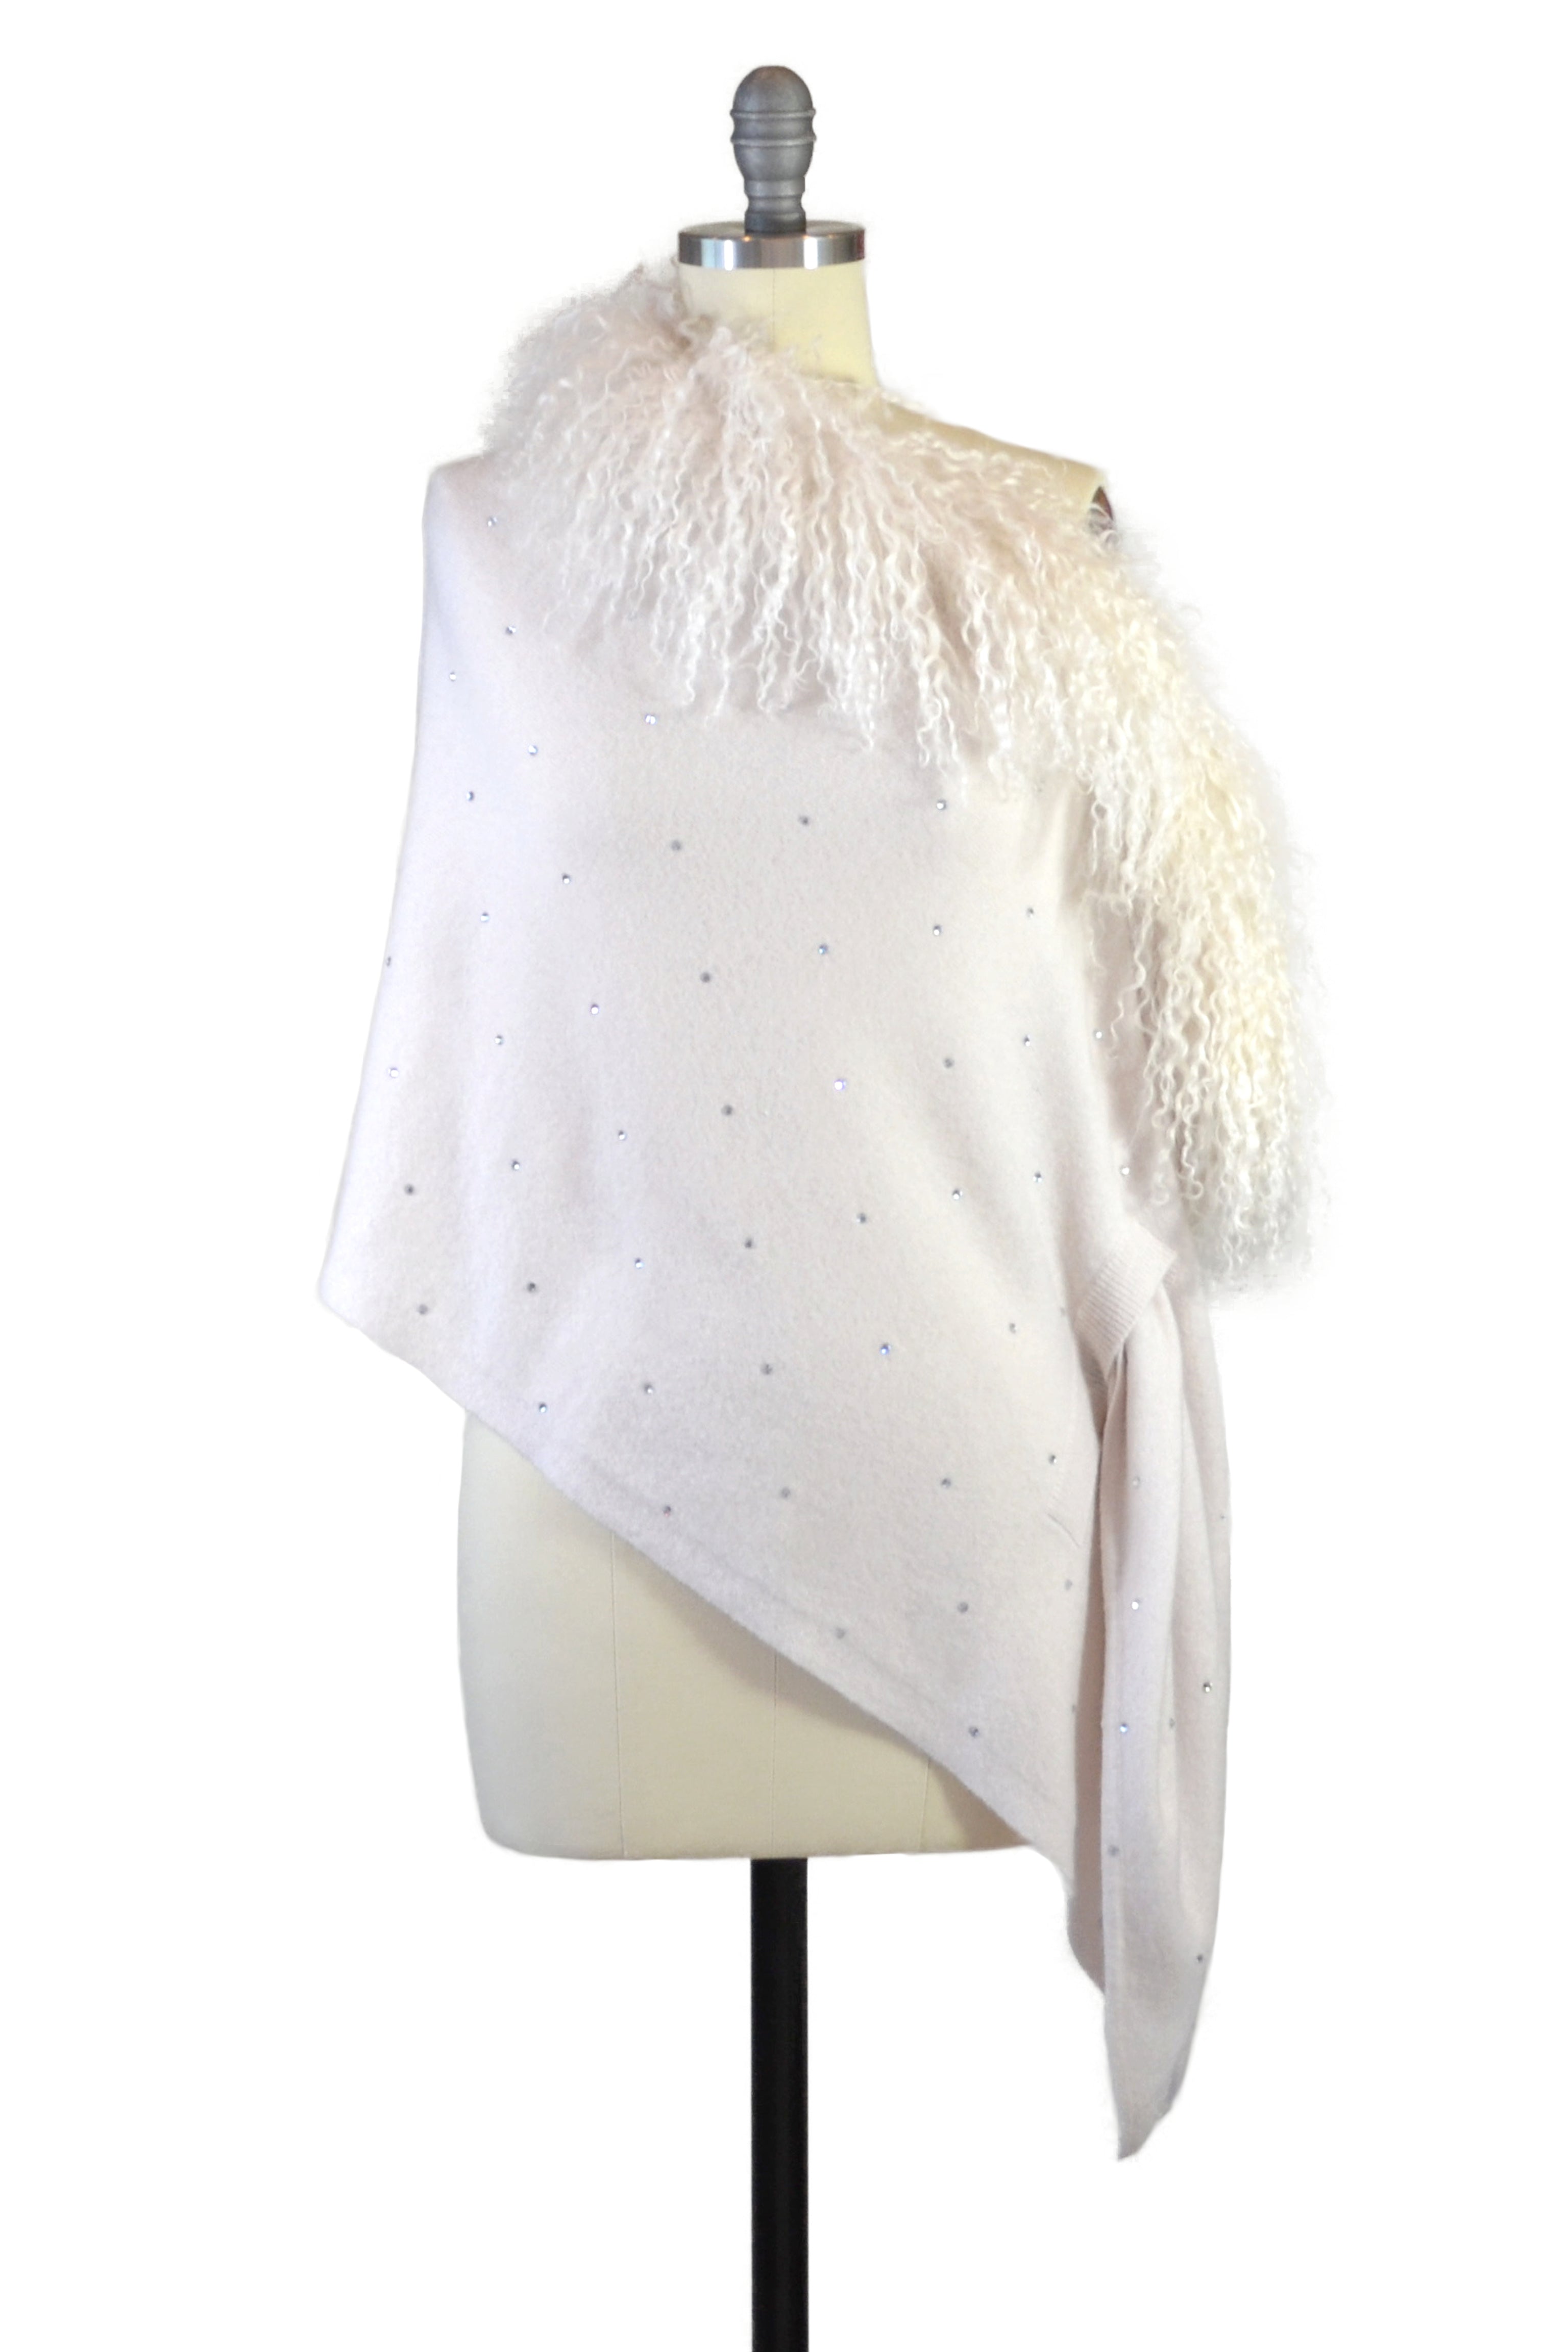 Cashmere Stole with Front Tibetan Sheep Fur & Crystals in Shell